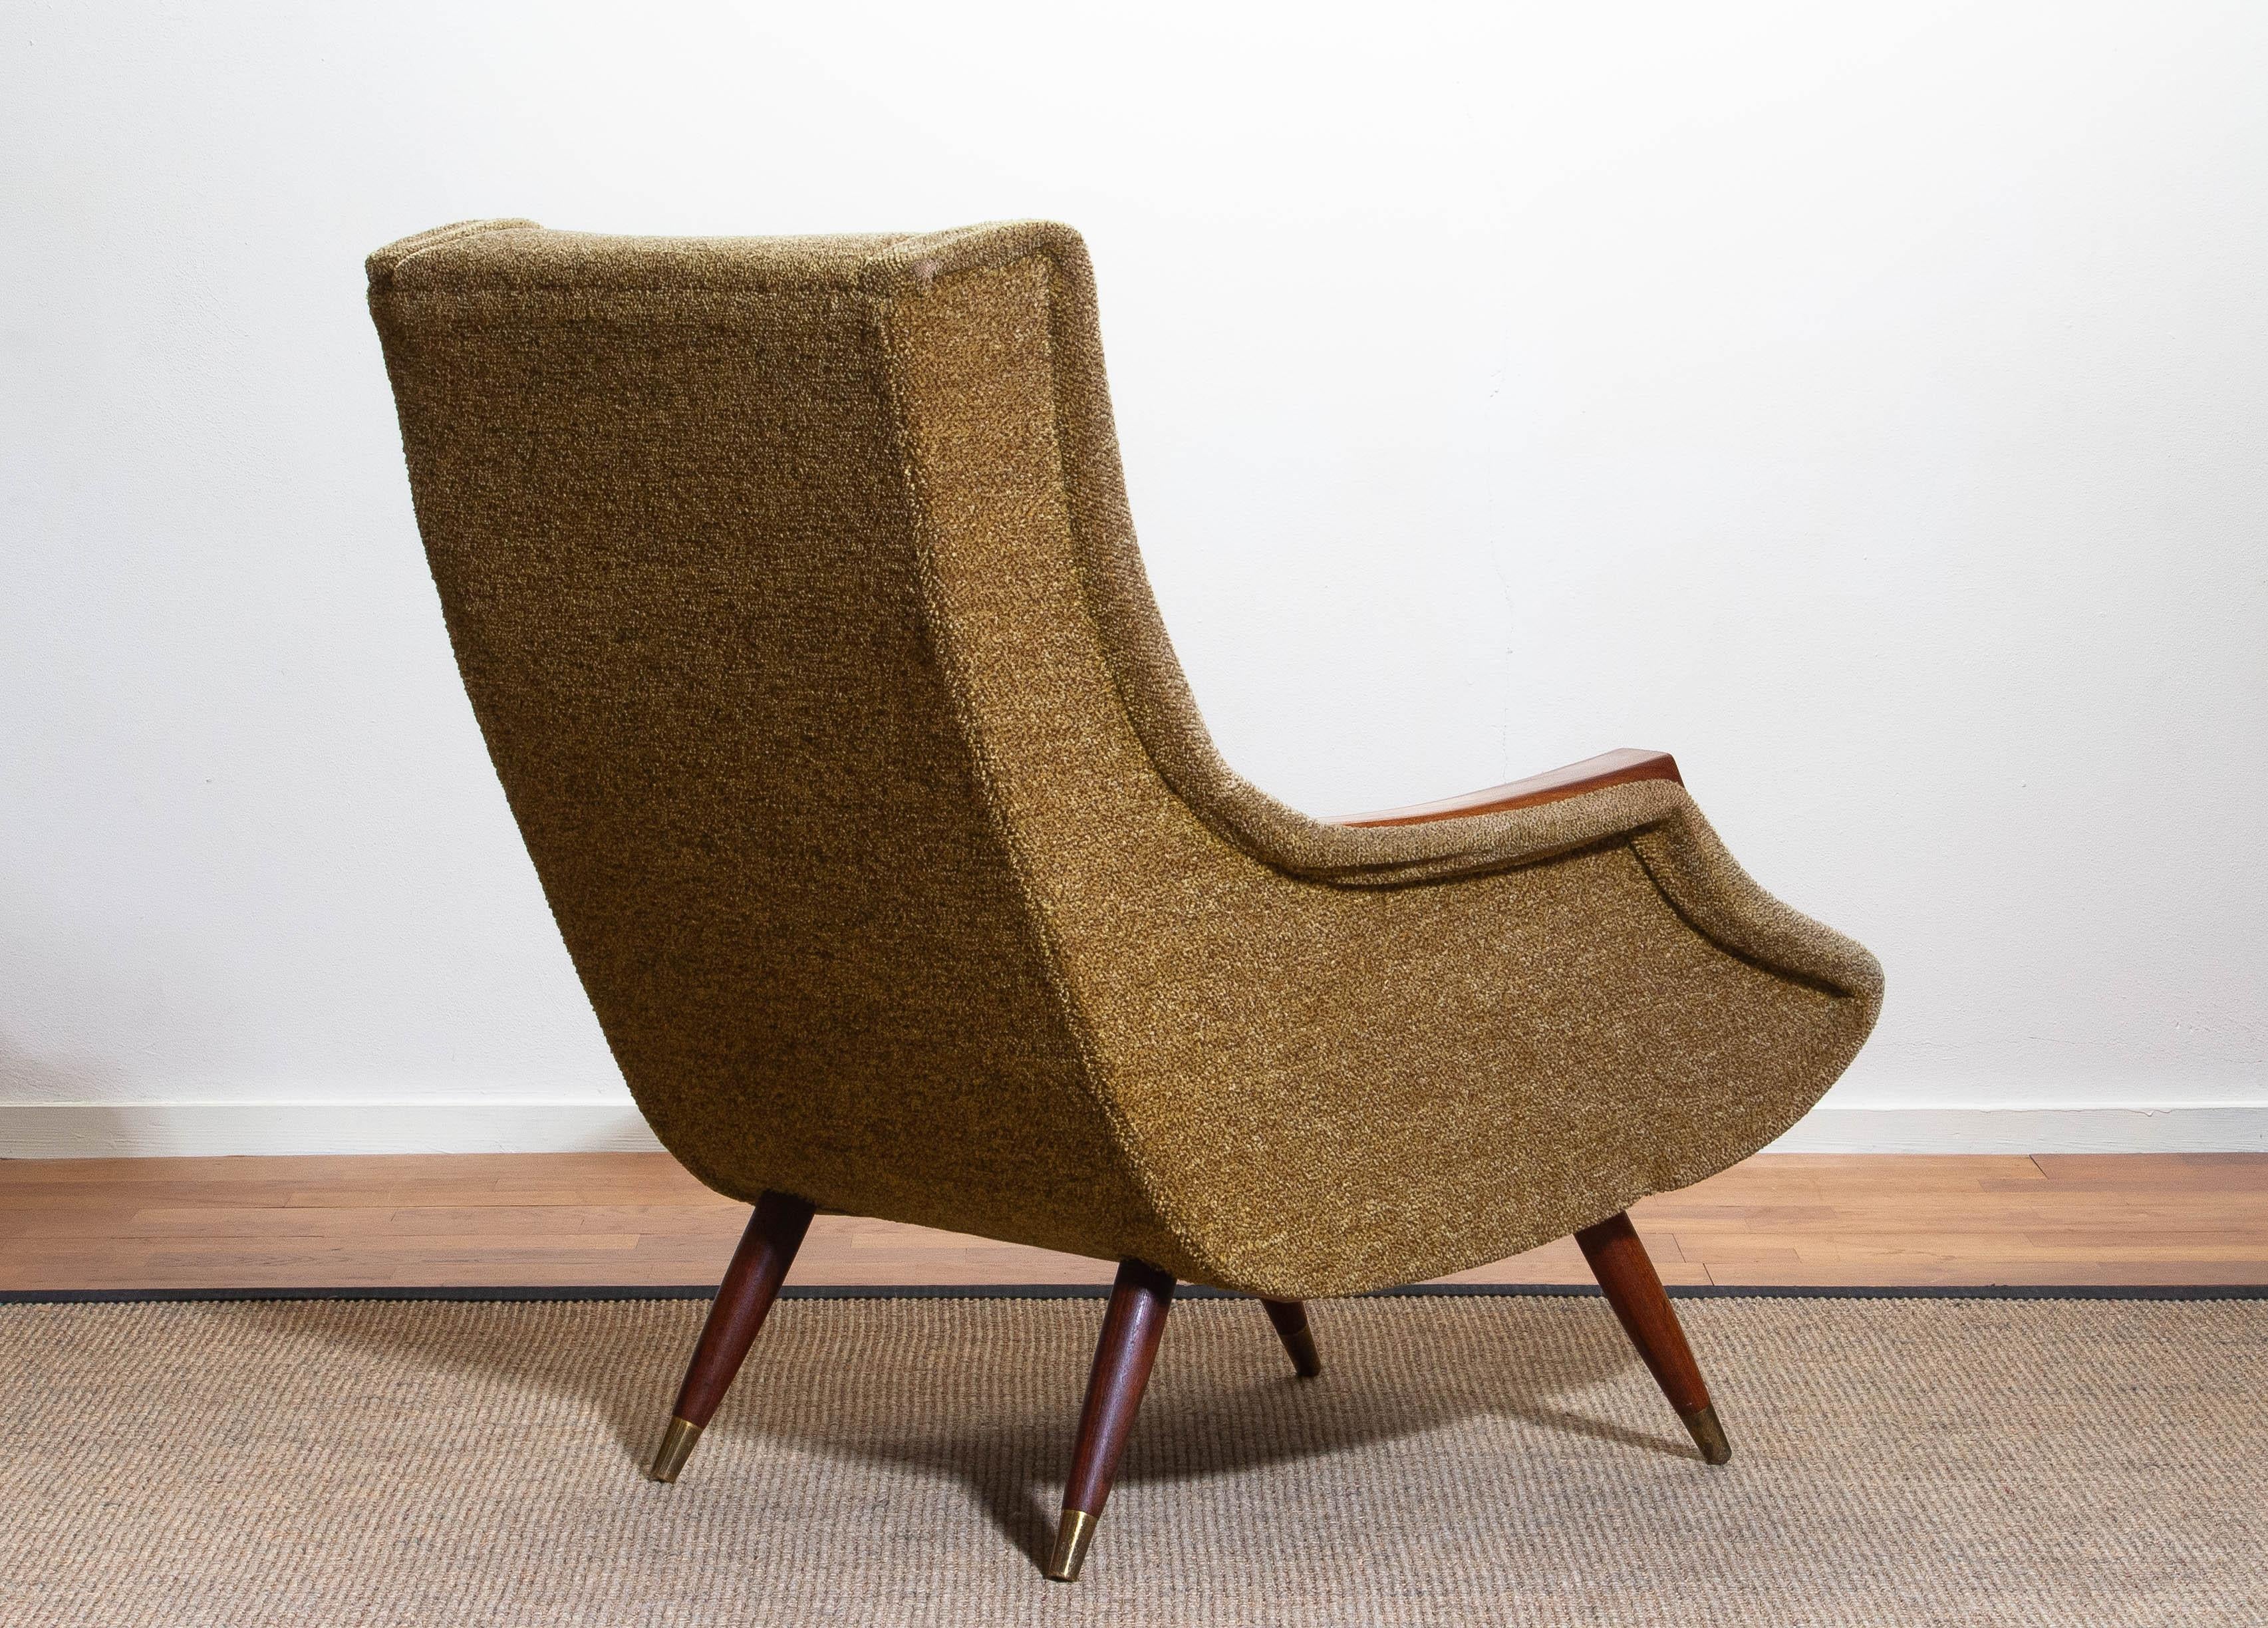 Mid-20th Century 1950s, Italian Lounge or Easy Chair by Aldo Morbelli for Isa Bergamo